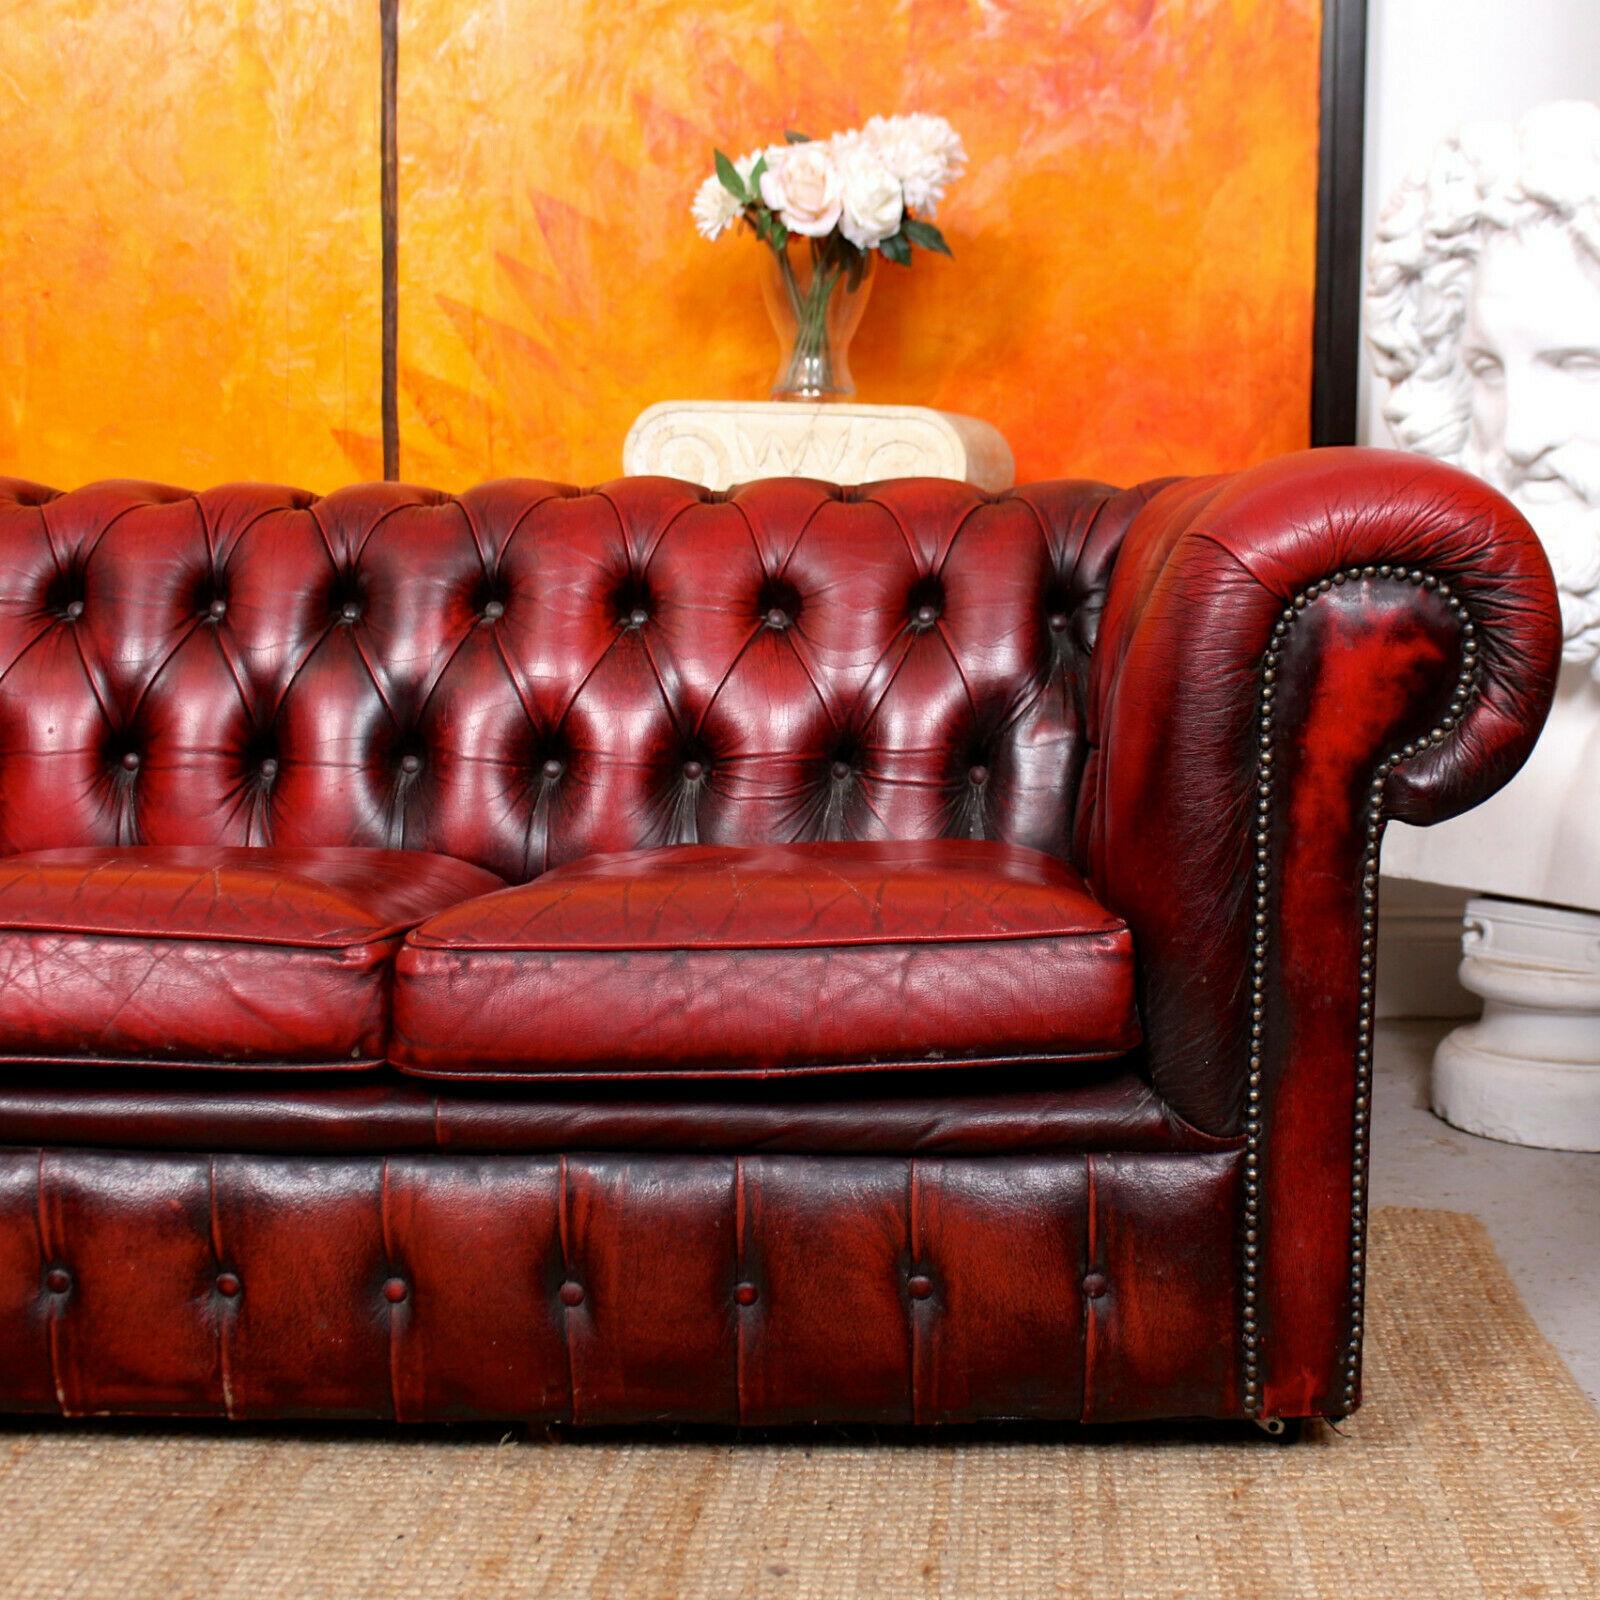 Chesterfield 3 seater oxblood leather chesterfield sofa 